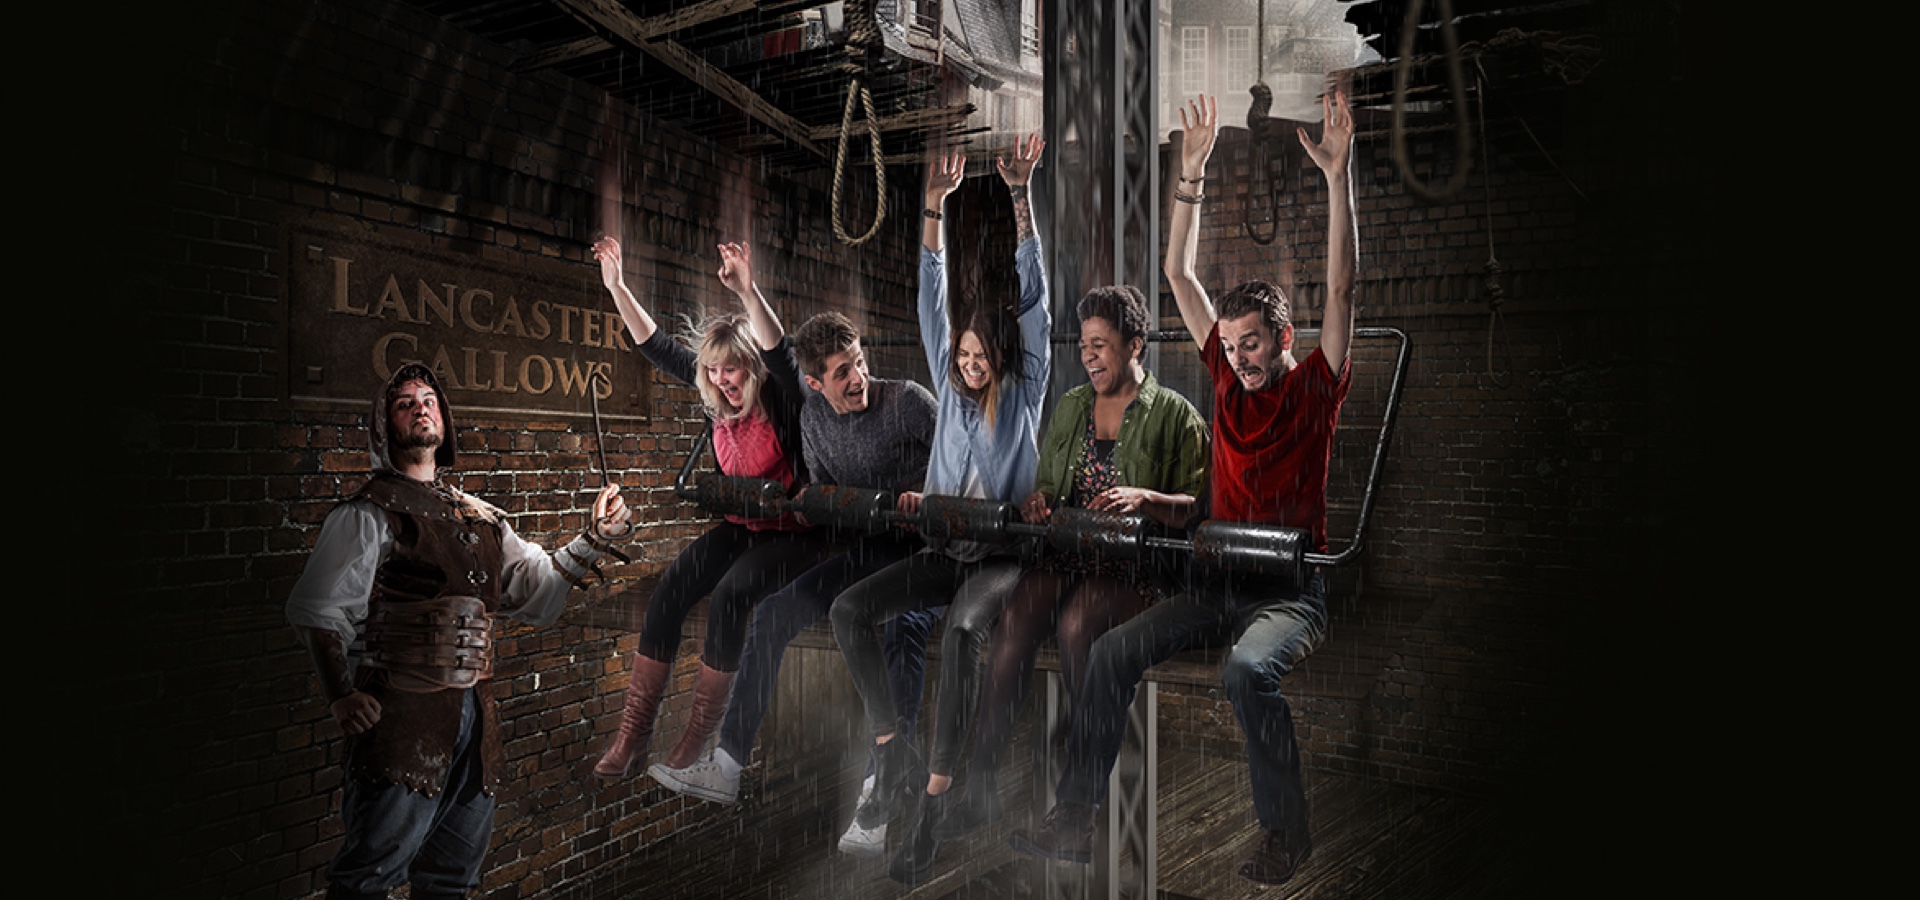 Guests on the drop dead ride at the Blackpool Tower Dungeon